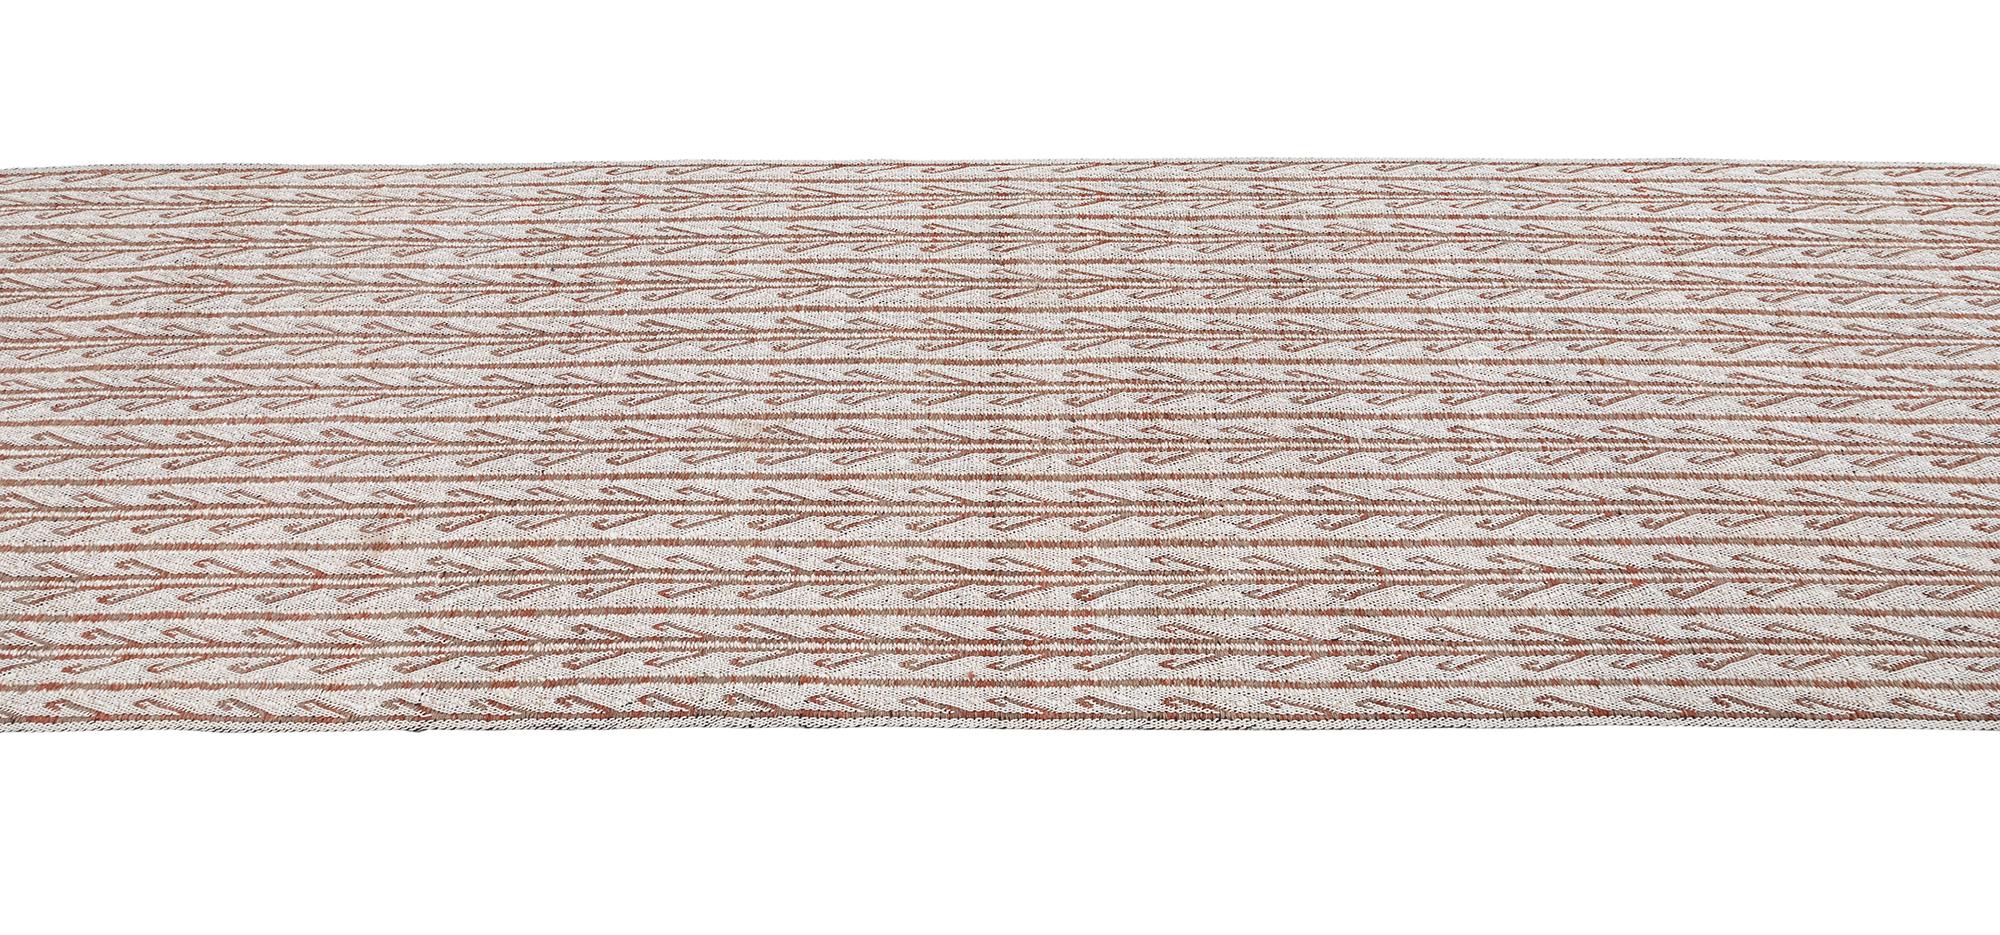 Ricci Tribal Flatweave Runner Rug In New Condition For Sale In New York, NY